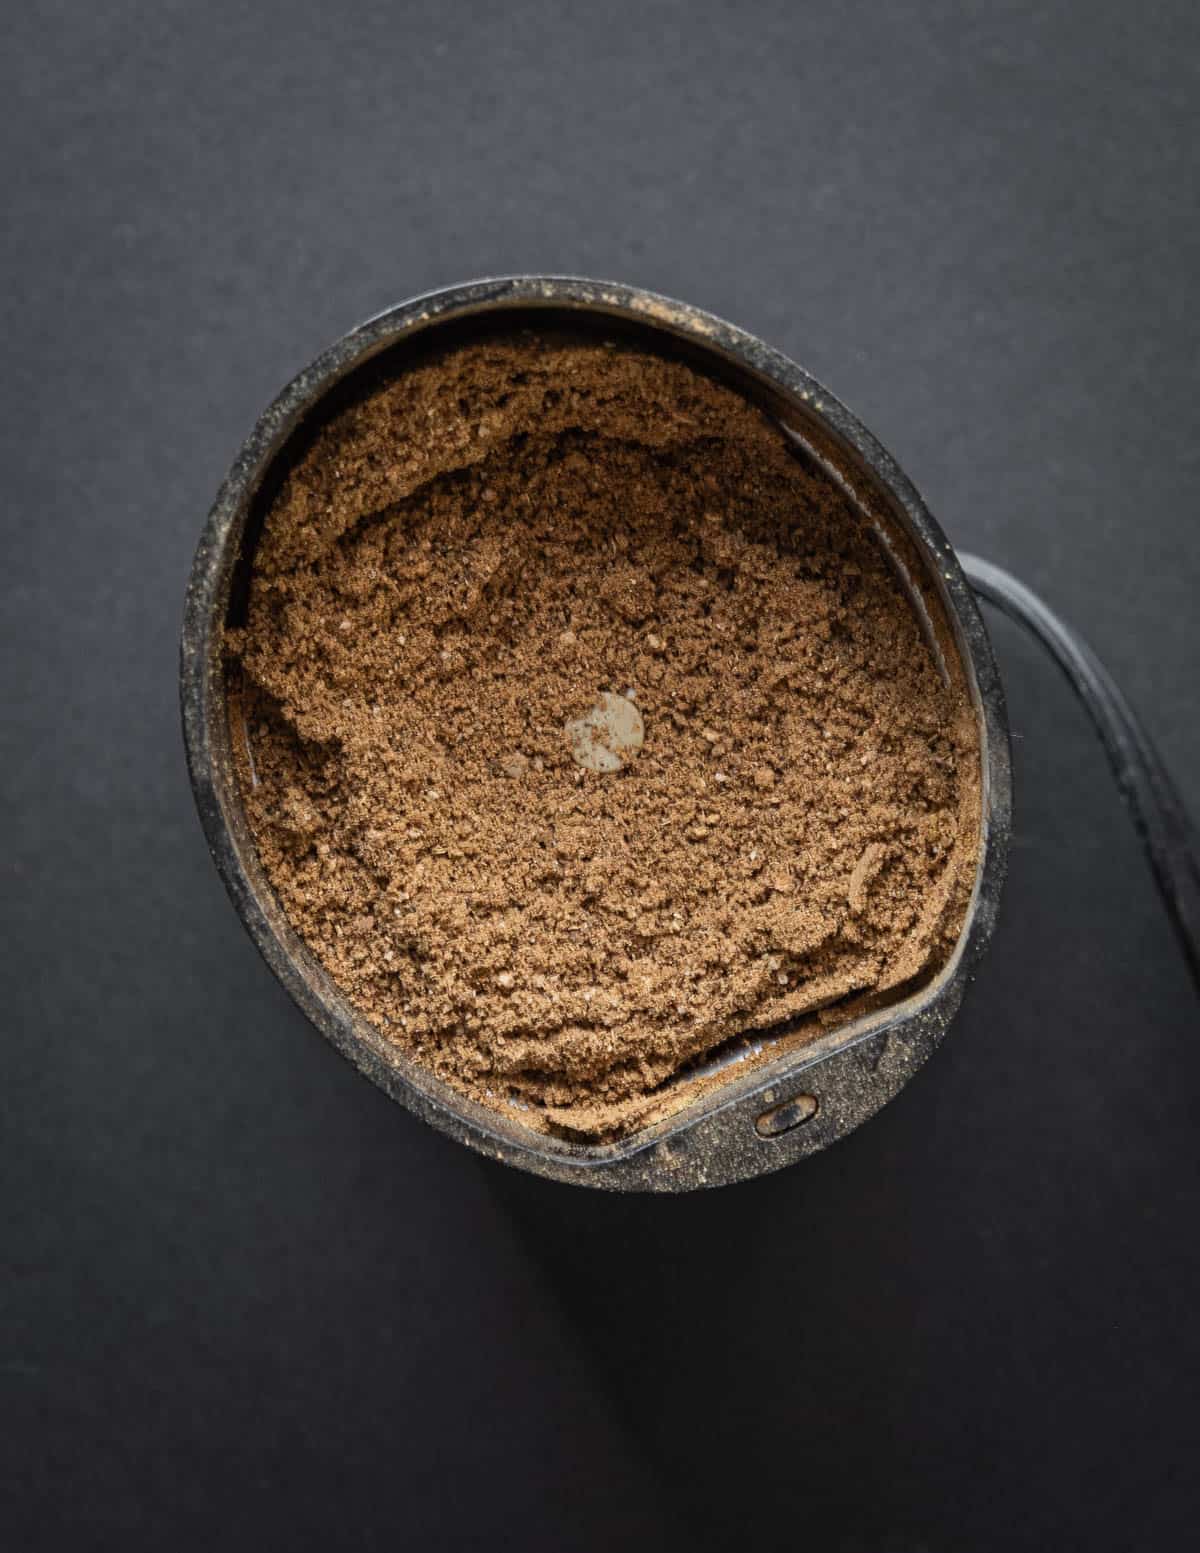 Ground, roasted linden seed powder in a coffee grinder. 